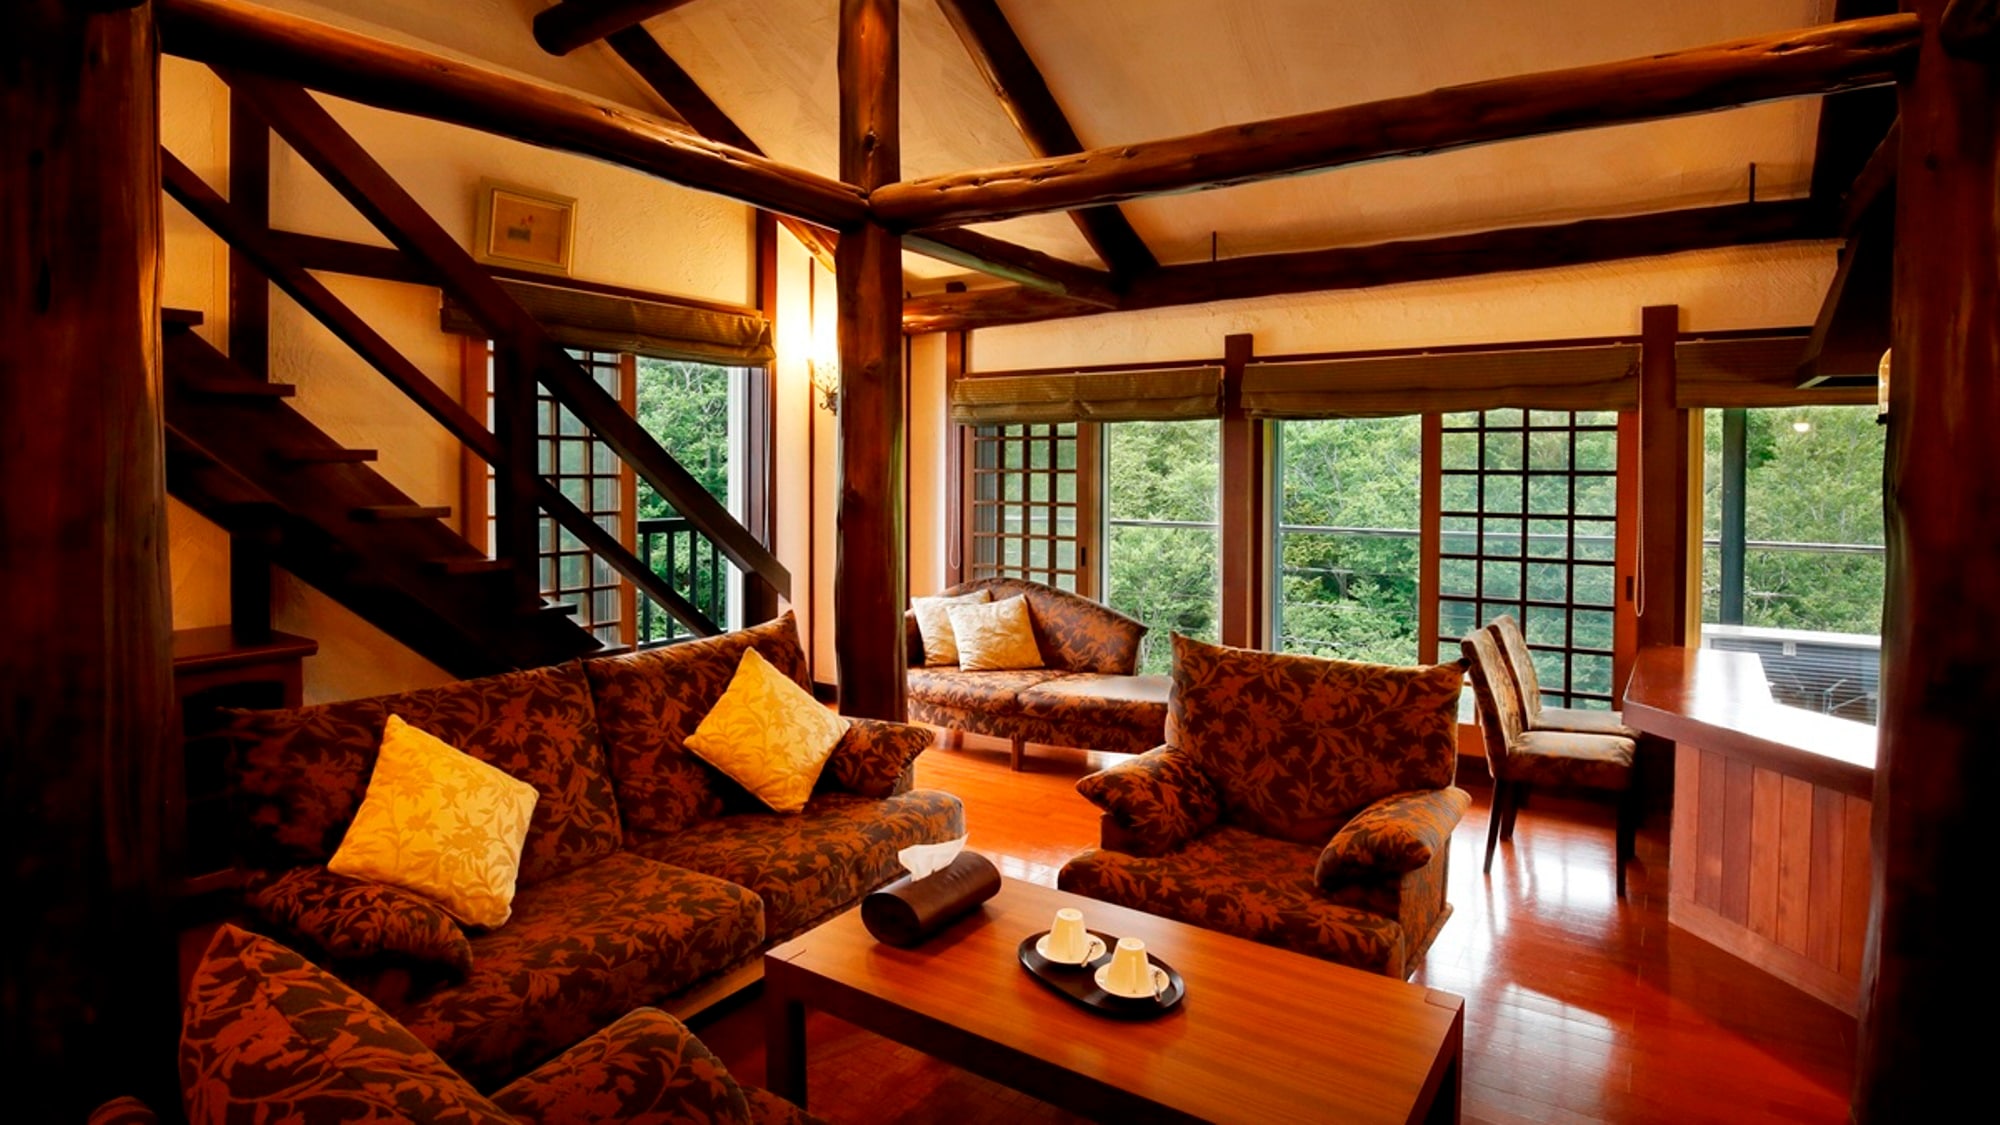 [Royal Suite] A luxurious structure with a fireplace, kitchen, maisonette with the warmth of wood, a Japanese-style room, and a bath with a view.